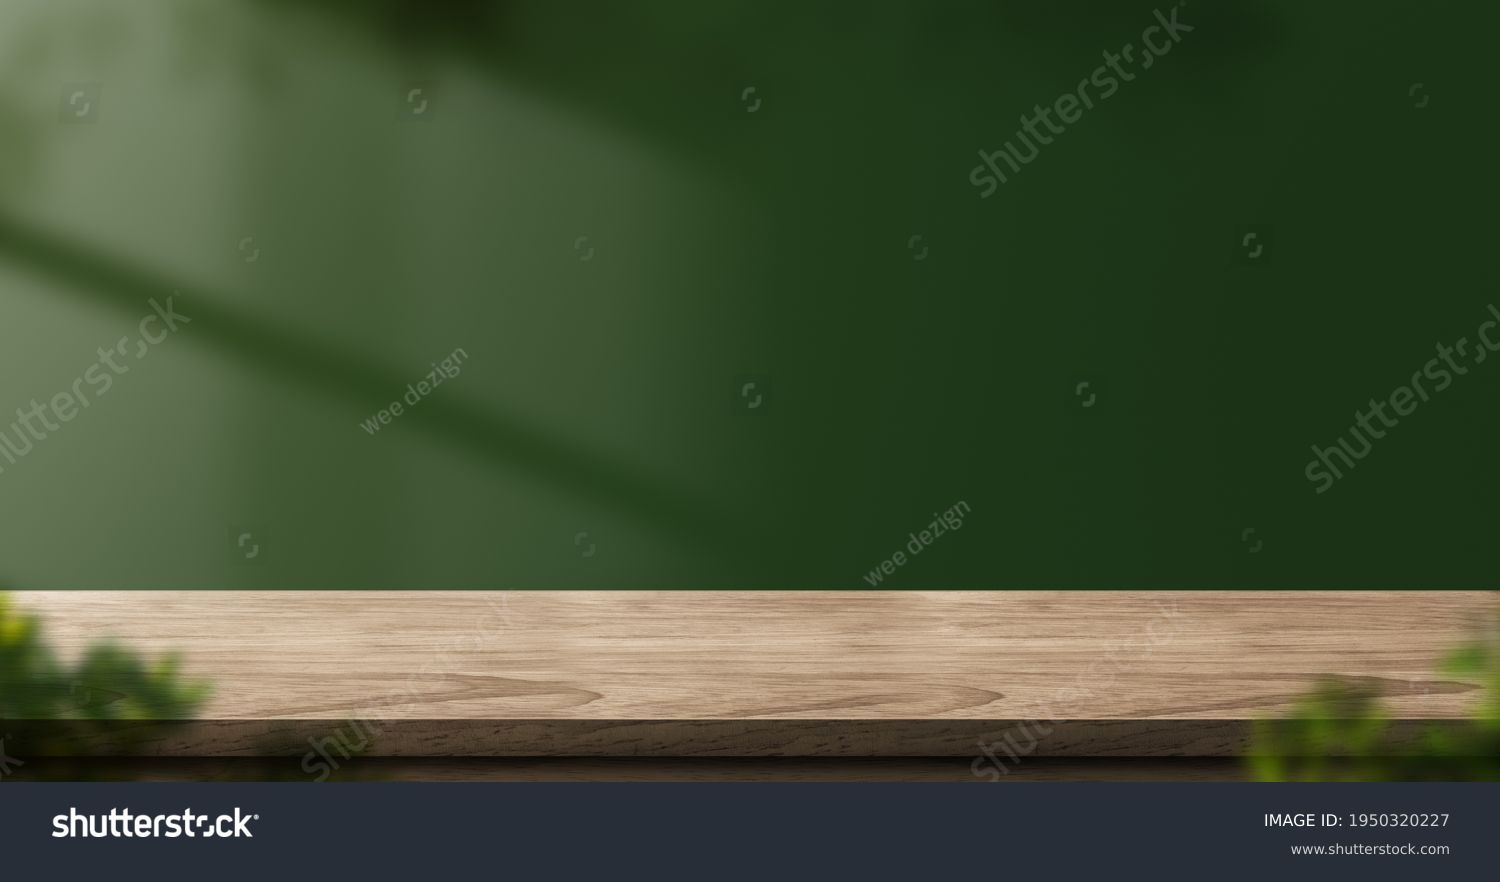 wood table green wall background with sunlight window create leaf shadow on wall with blur indoor green plant foreground.panoramic banner mockup for display of product.eco friendly interior concept #1950320227